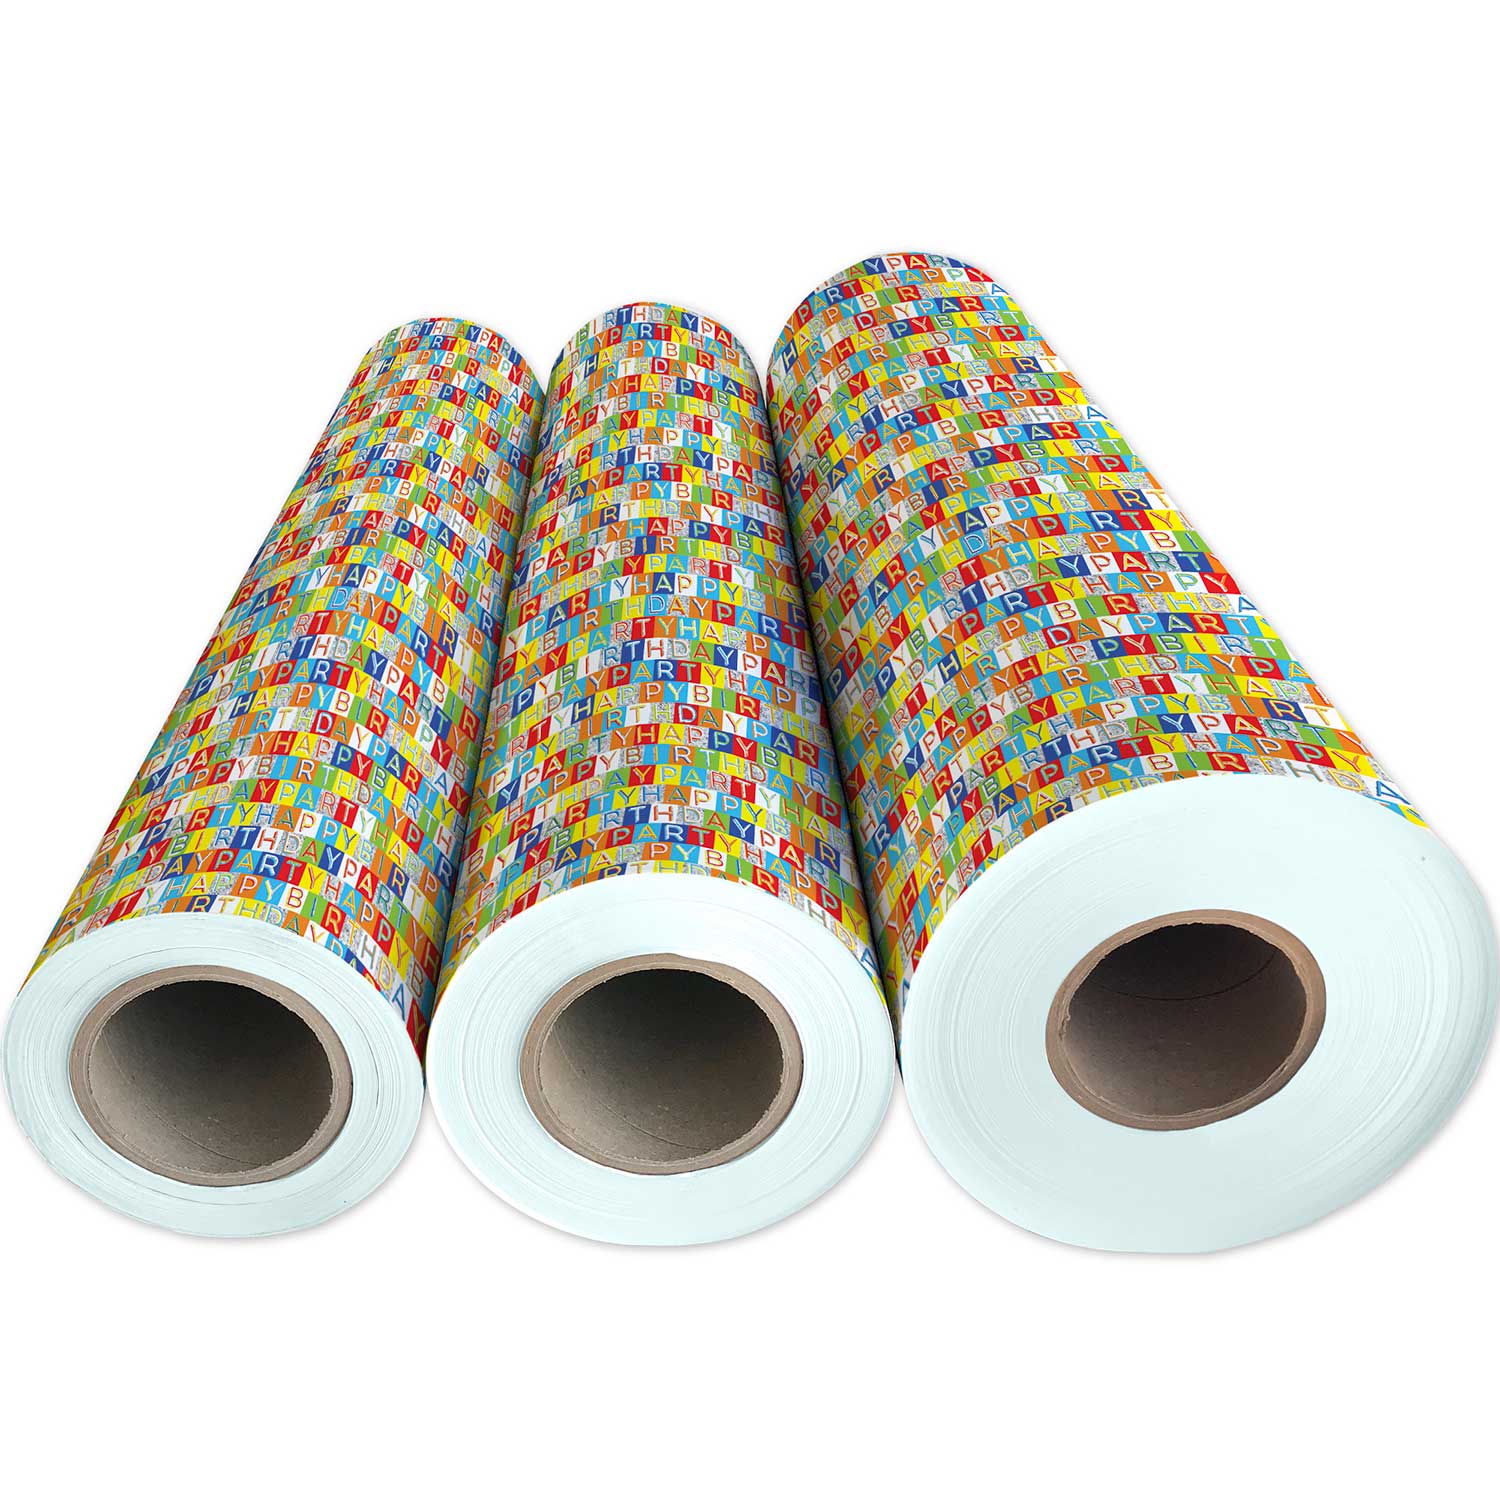 Holographic Birthday Gift Wrap Full Ream 833 ft x 30 in